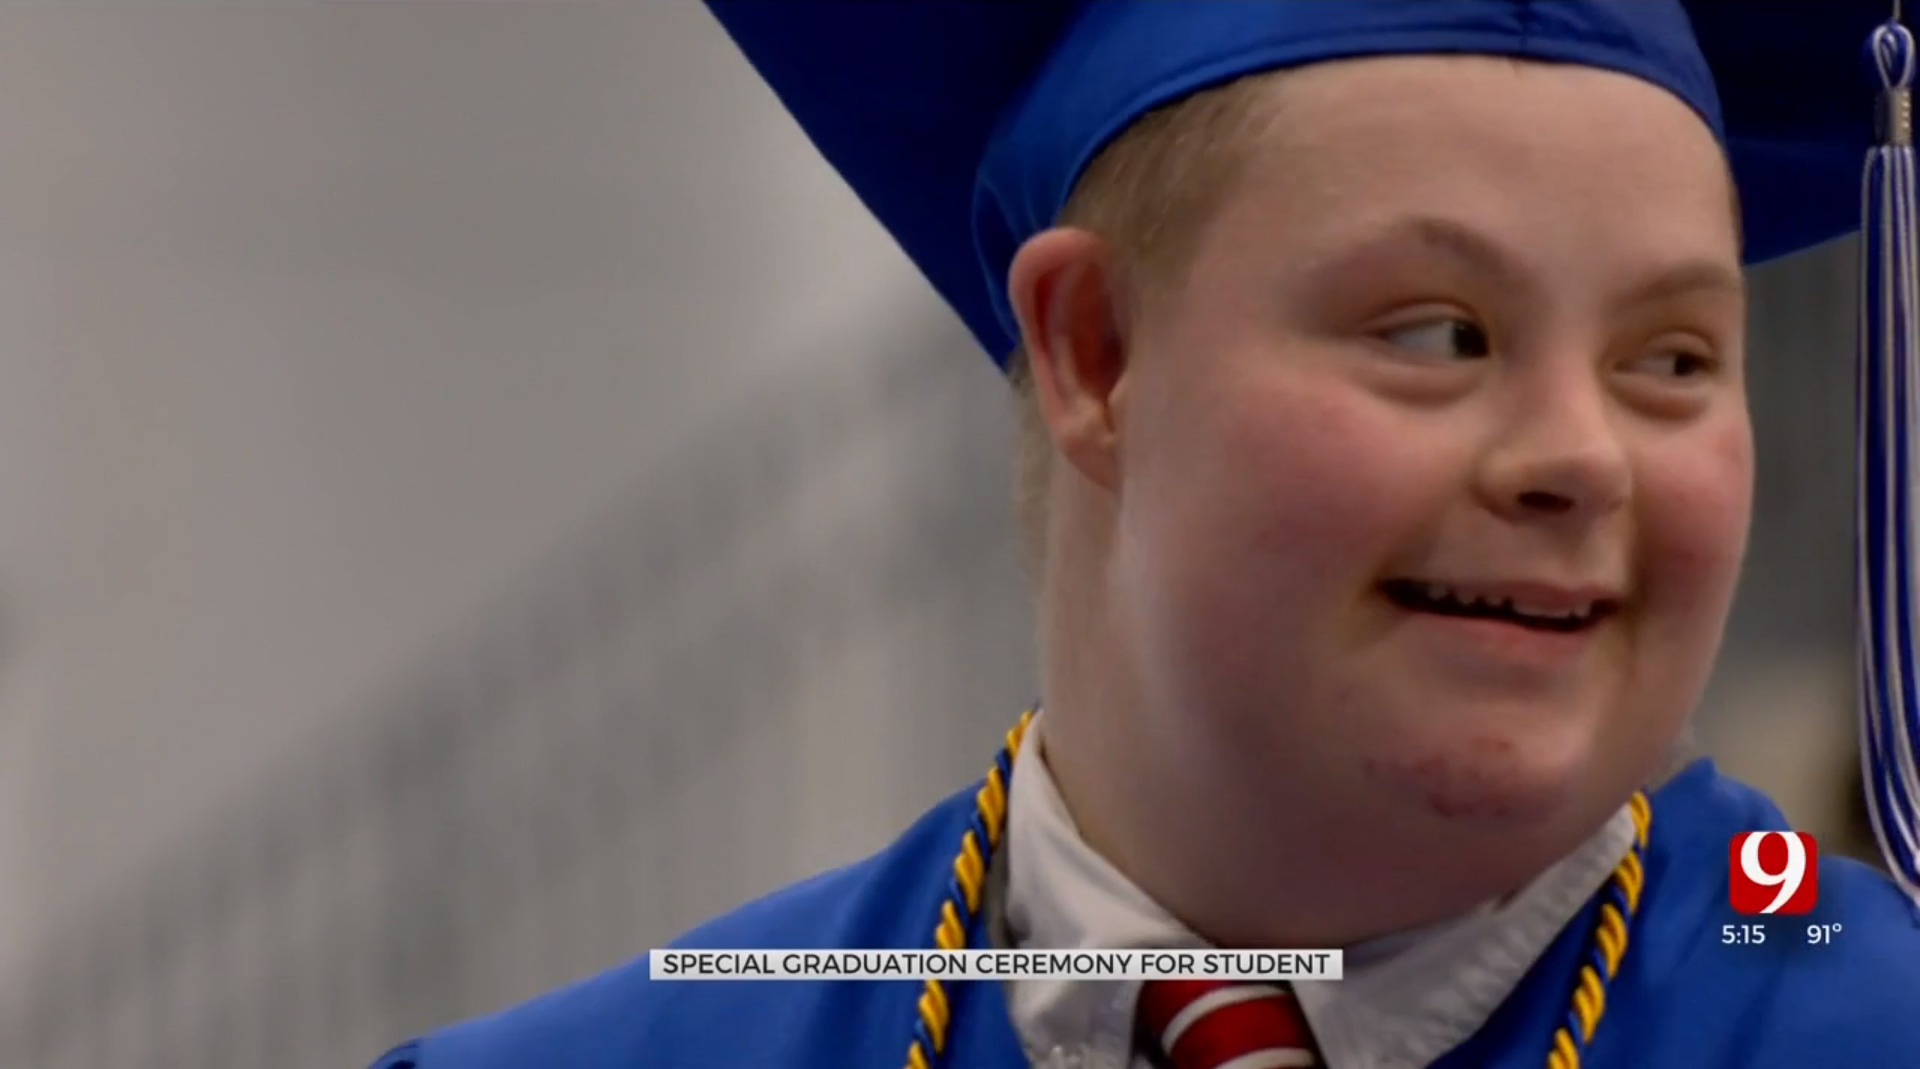 Family, Former Principal Hold Special Graduation Ceremony For Special Needs Student